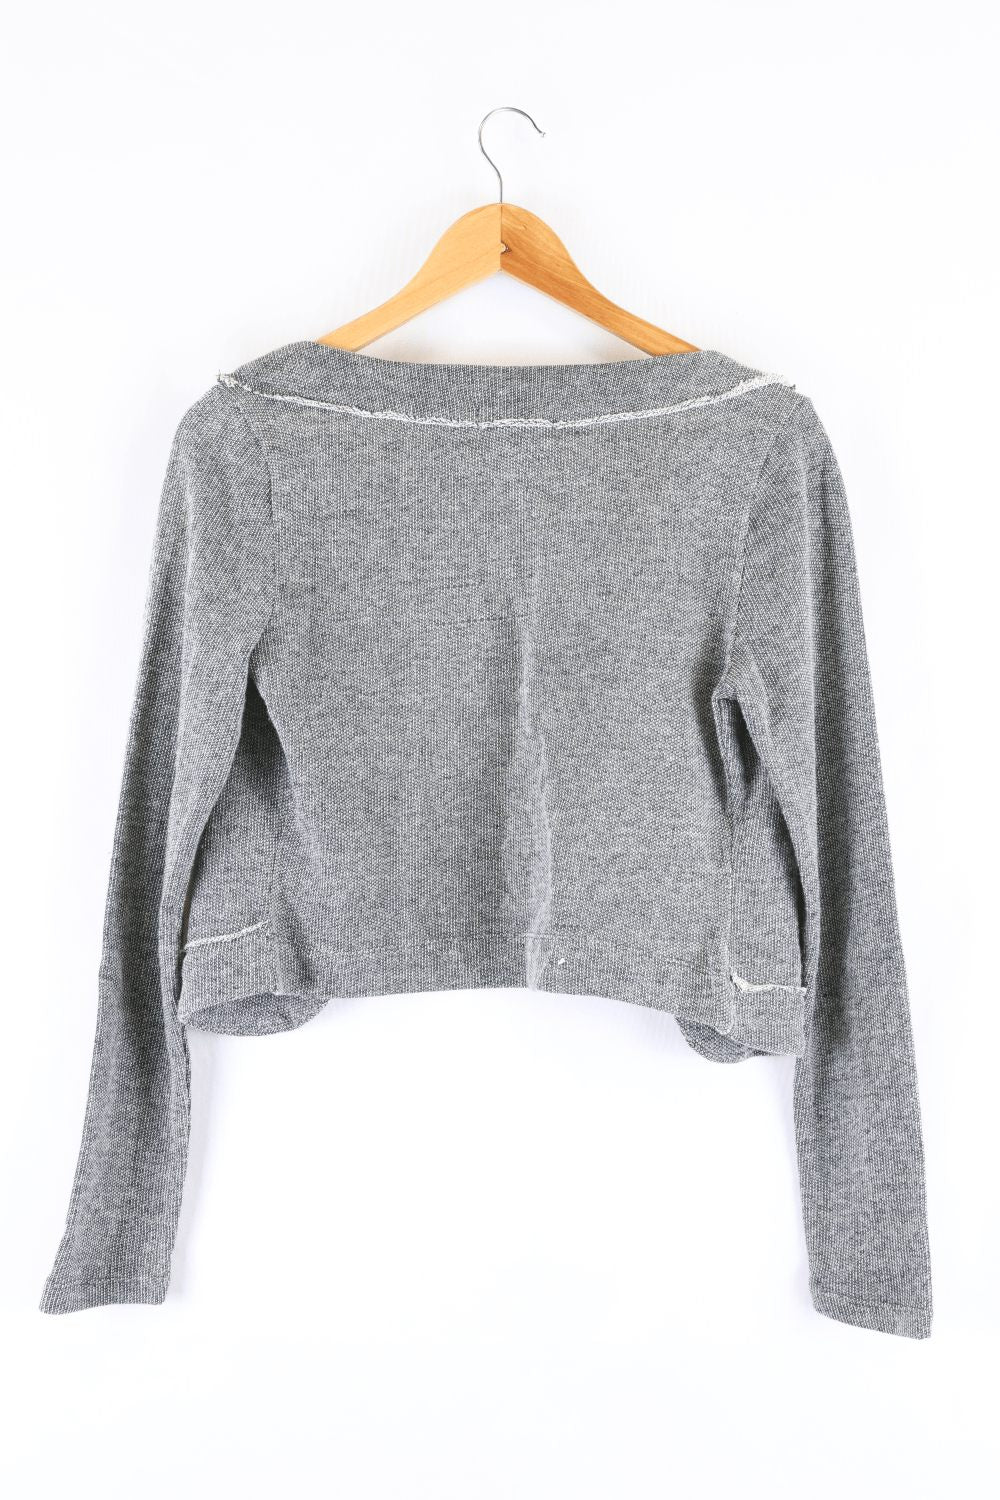 Wet Seal Knit Grey Cropped Cardigan S